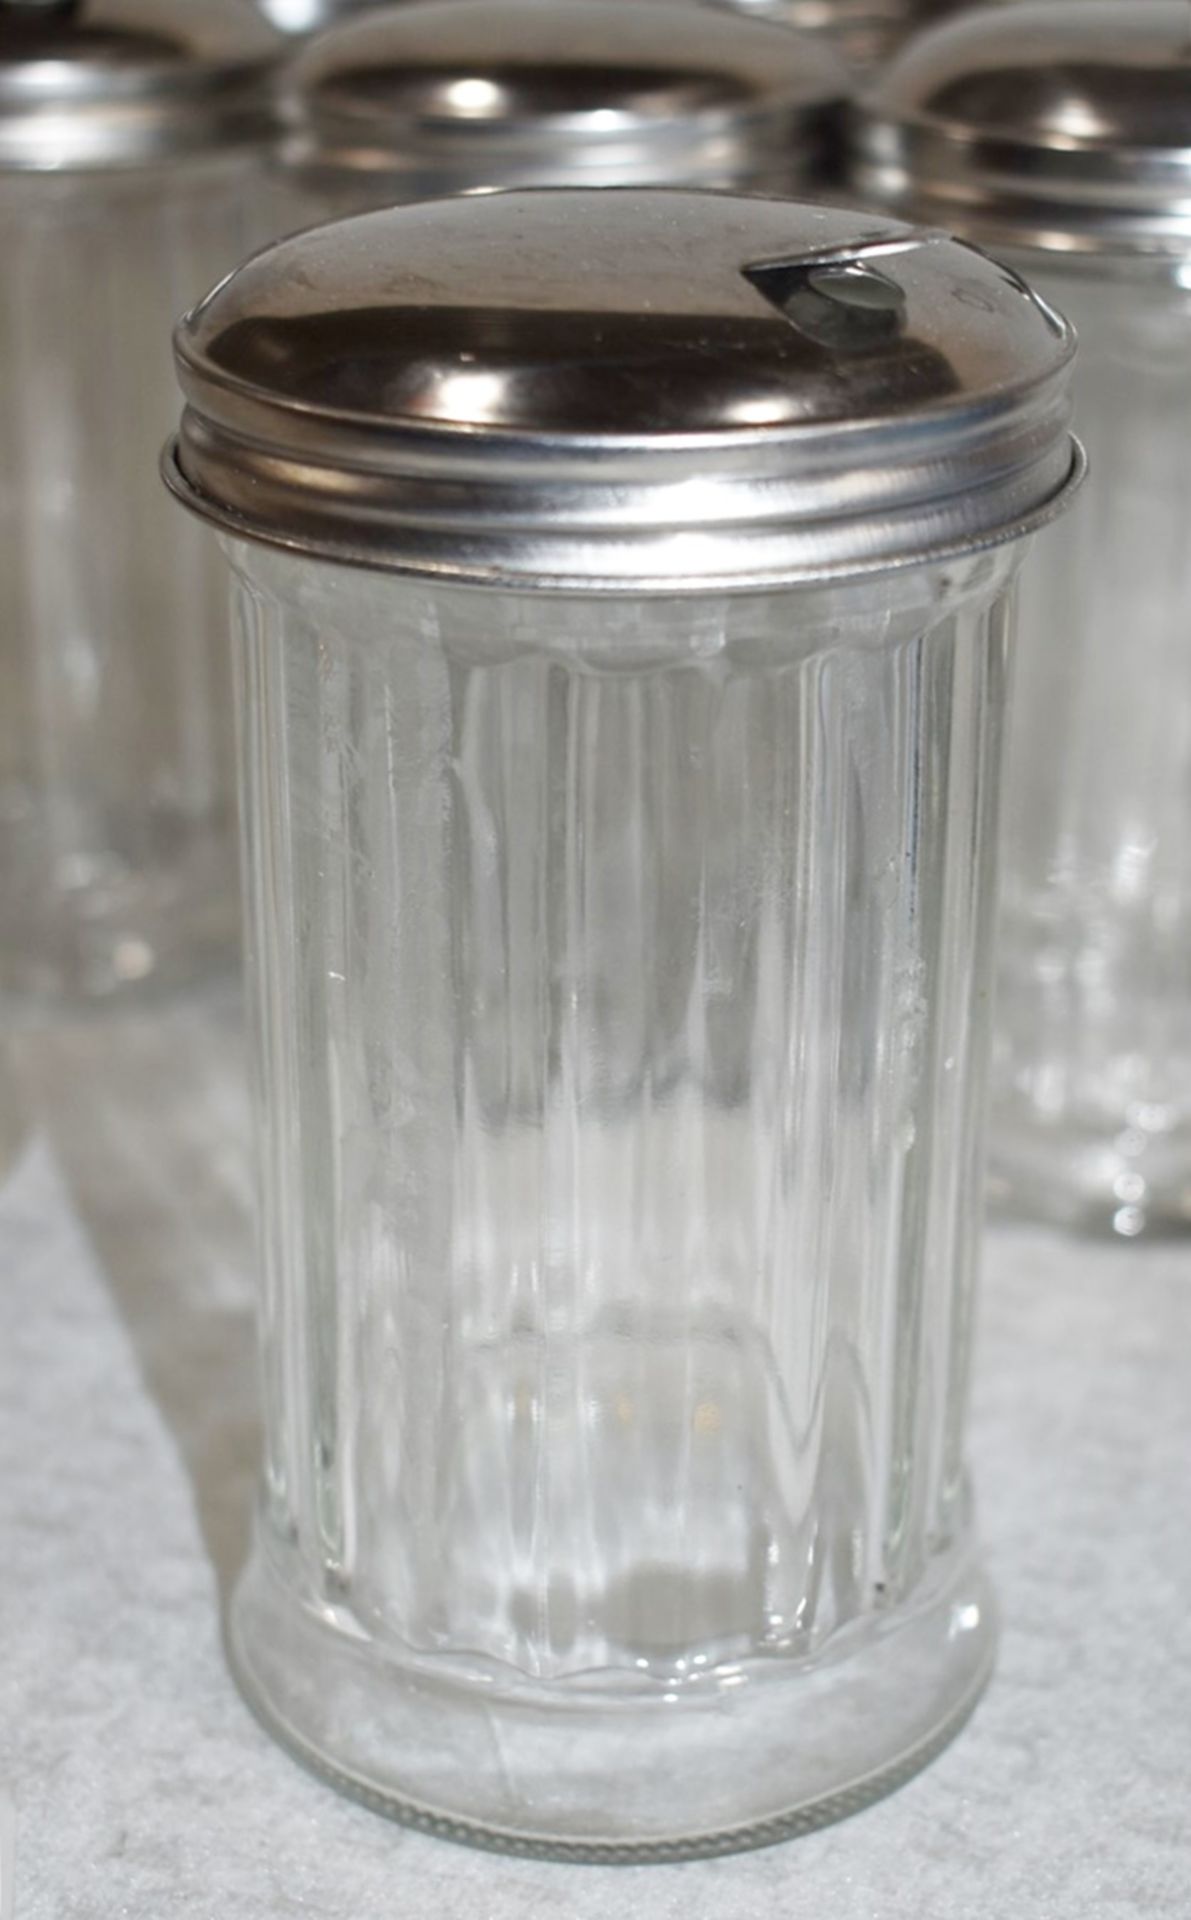 14 x Glass Sugar Dispensing Pots With Stainless Steel Lids - Suitable For Cafes or Restaurants - Image 6 of 8